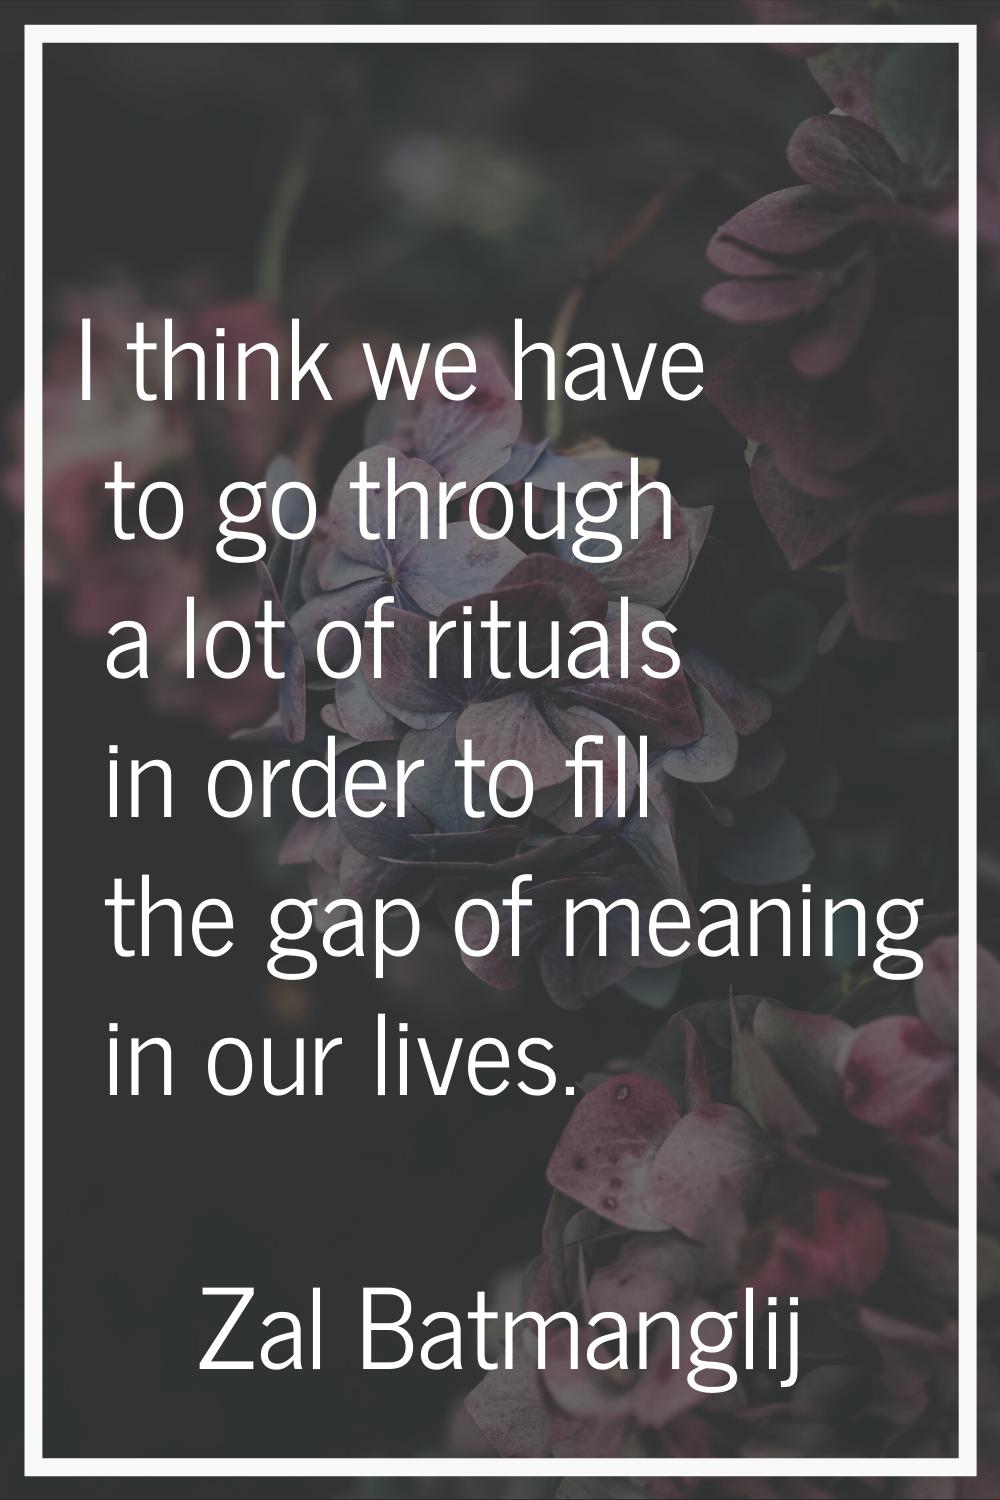 I think we have to go through a lot of rituals in order to fill the gap of meaning in our lives.